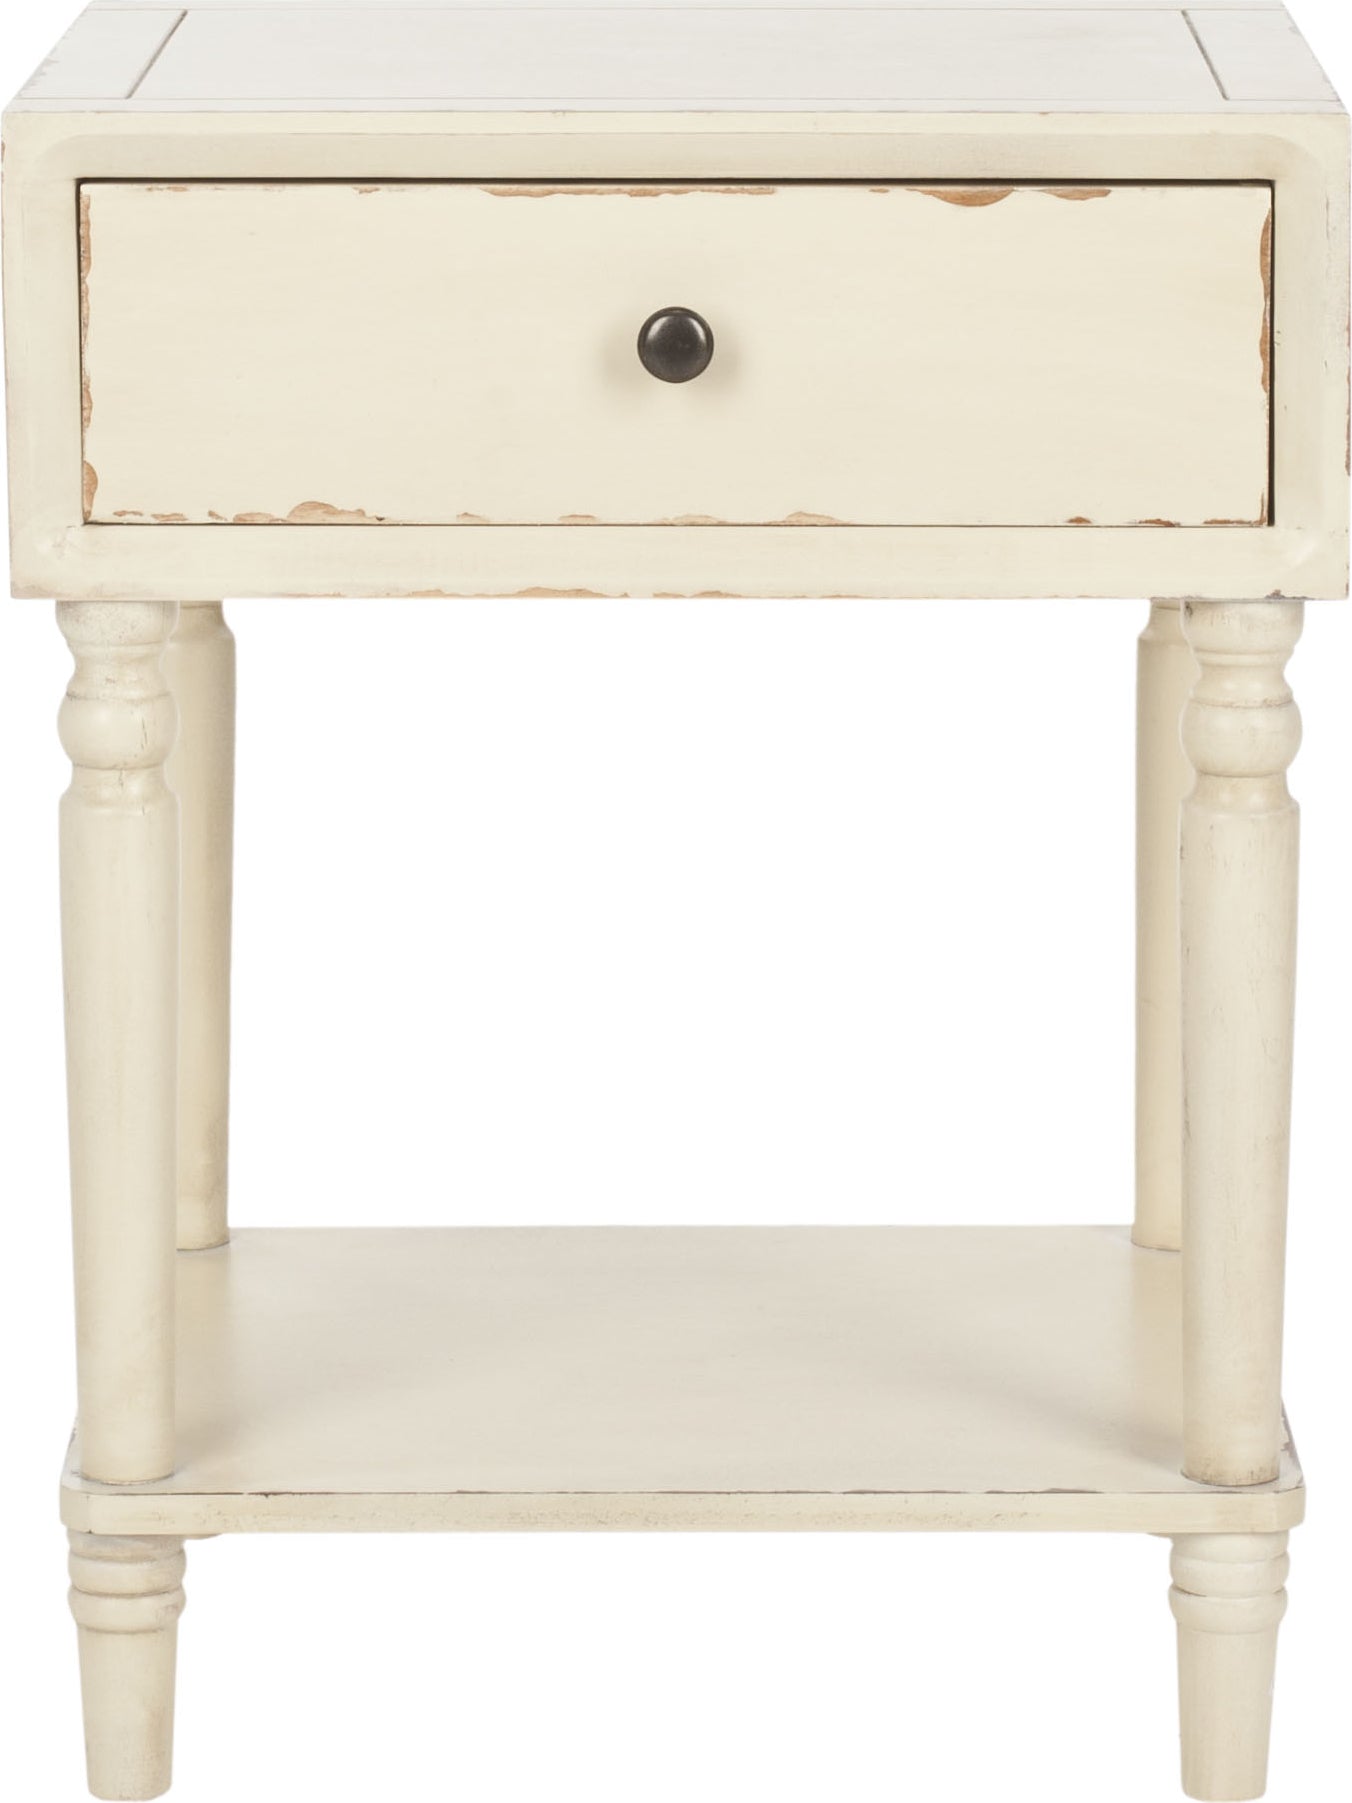 Safavieh Siobhan Accent Table With Storage Drawer Vintage Cream Furniture main image